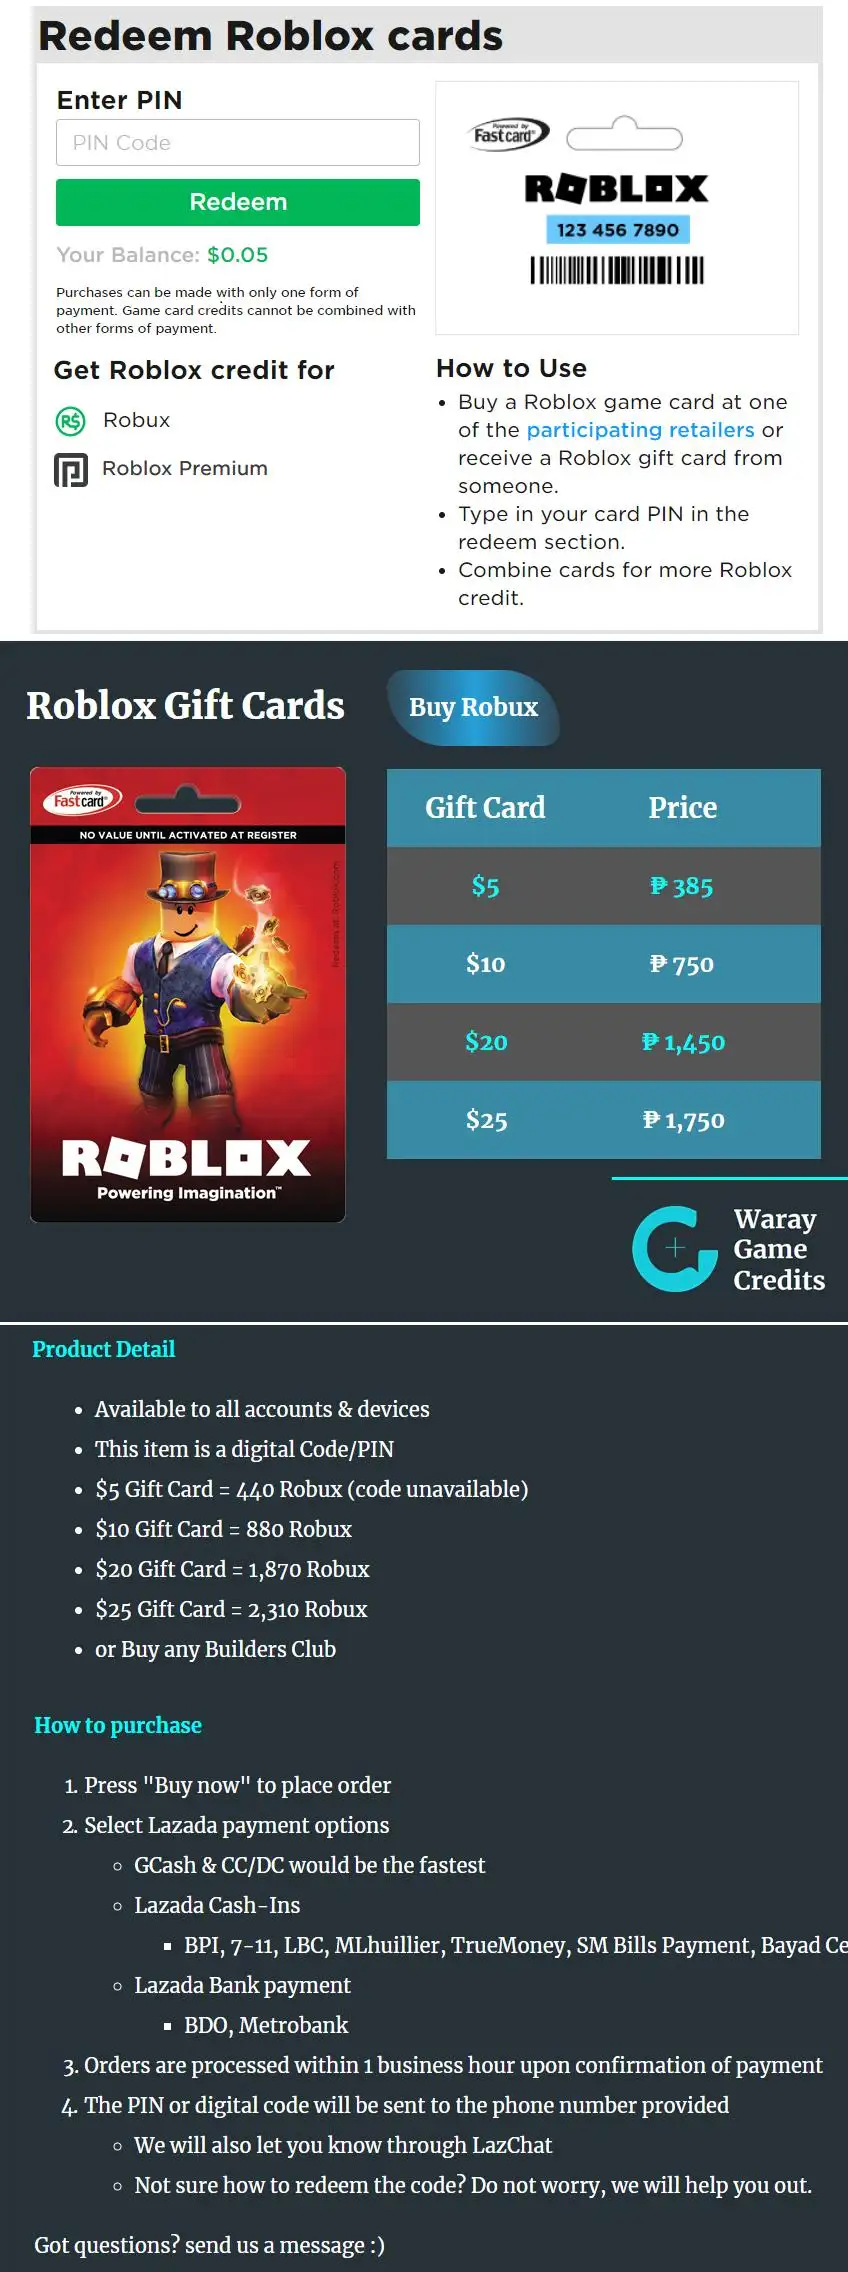 Robux Peso - roblox apk updated how to get 700 robux